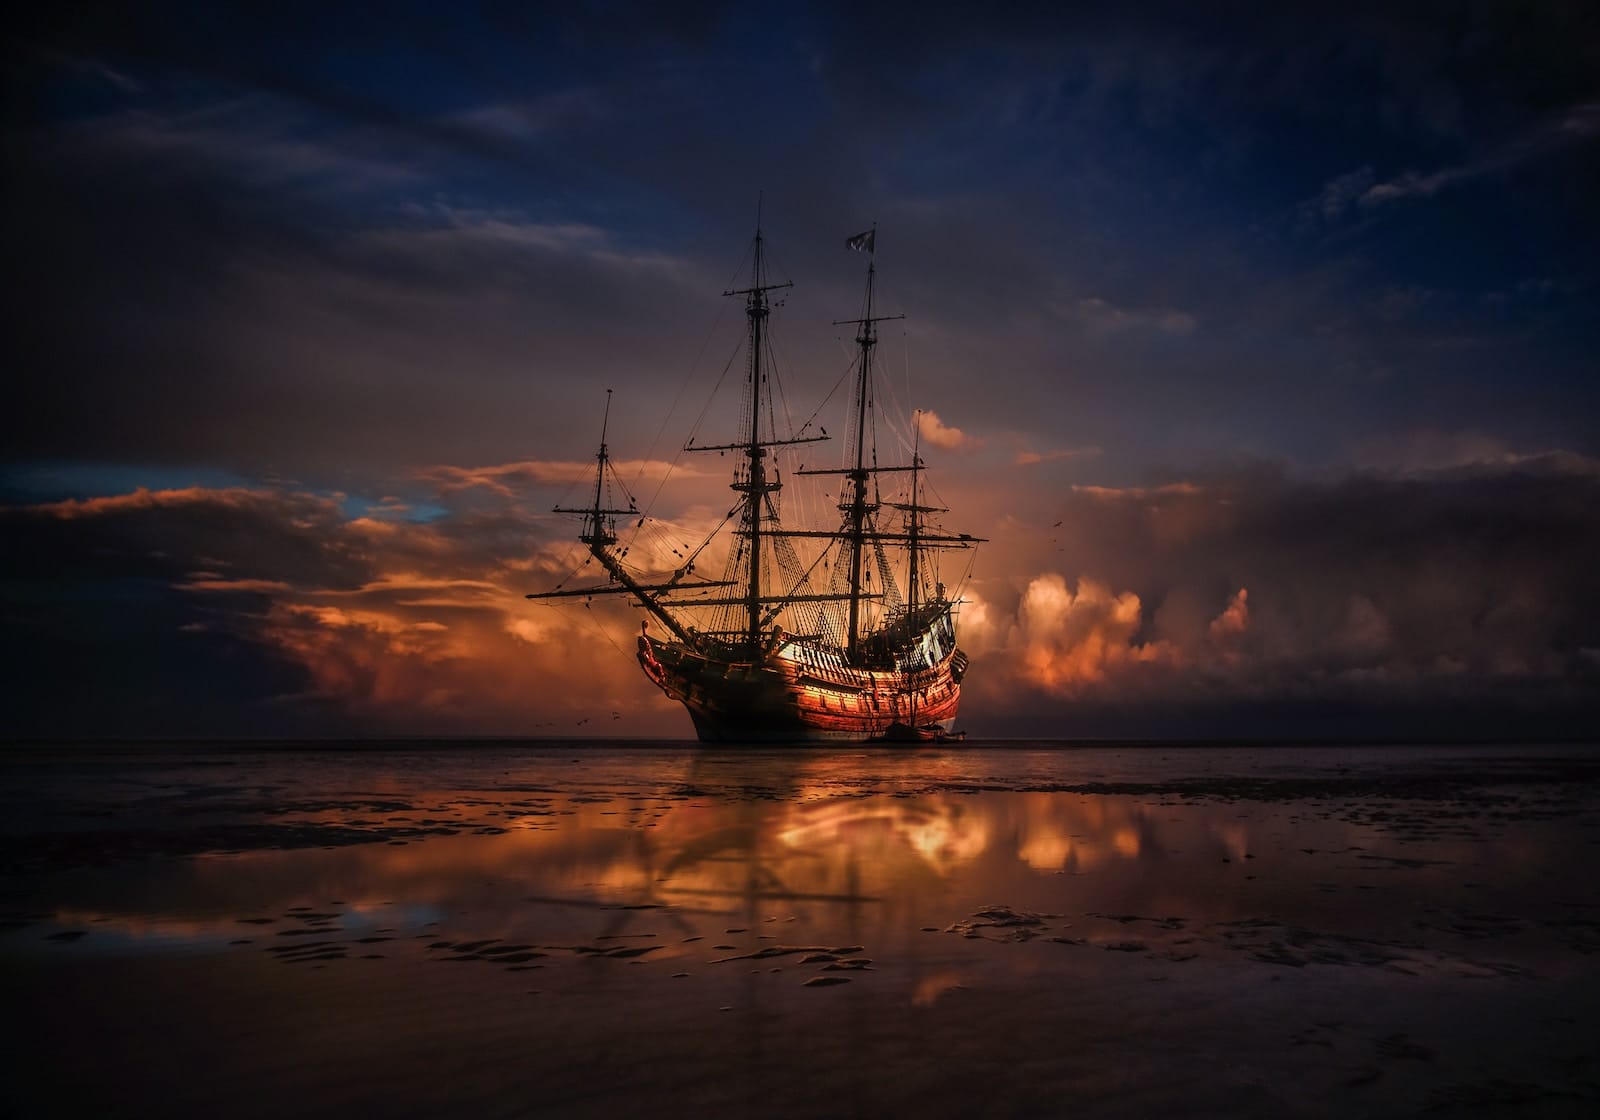 brown ship on sea during sunset